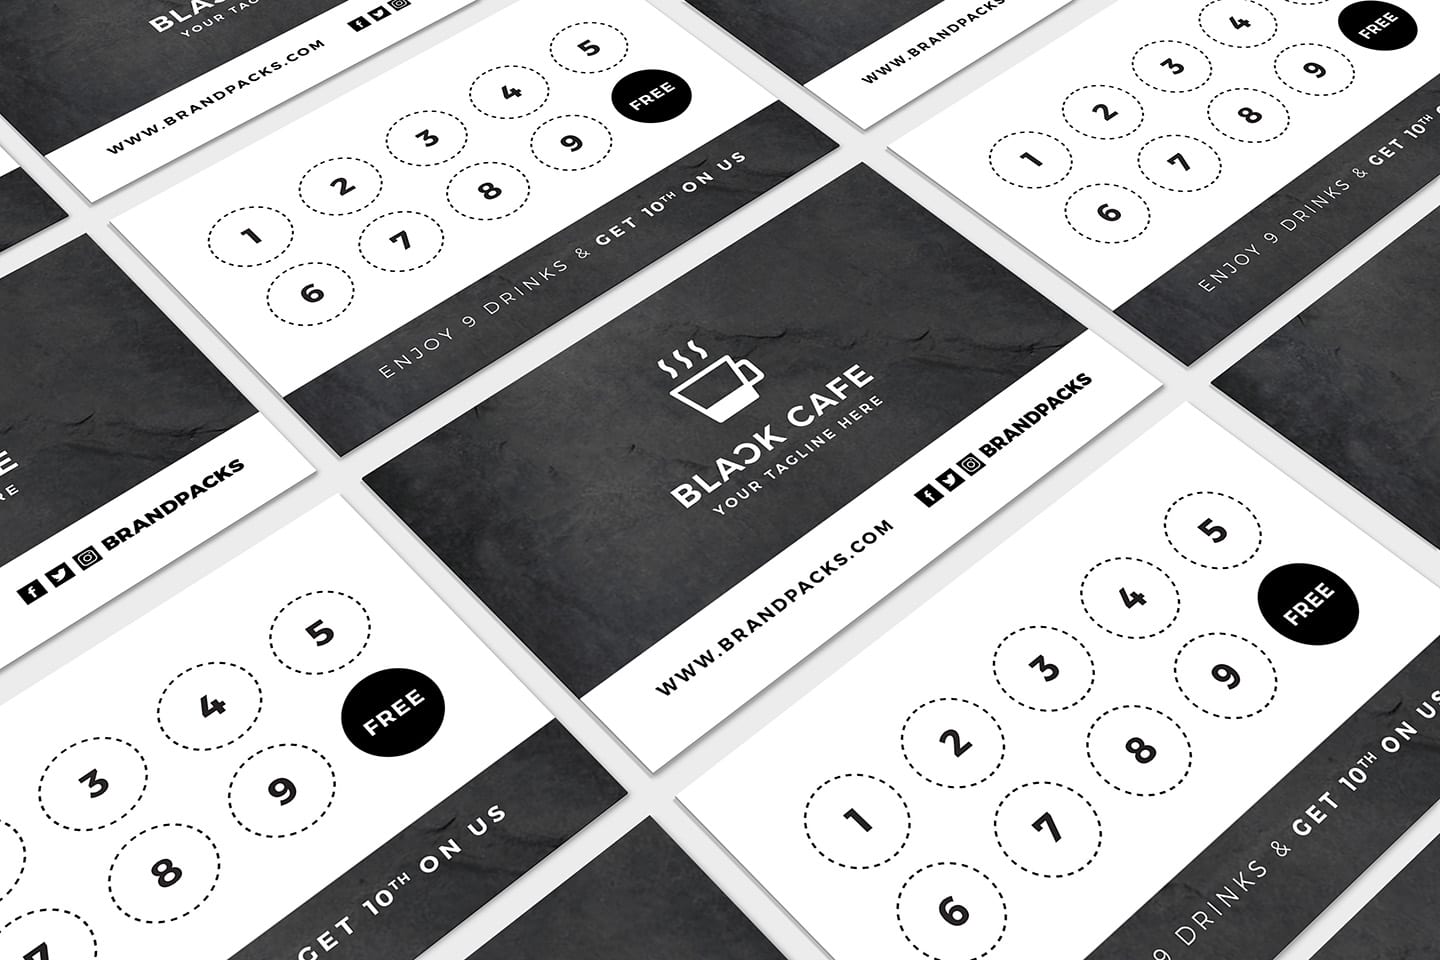 Free Loyalty Card Templates - PSD, Ai & Vector - BrandPacks With Business Punch Card Template Free